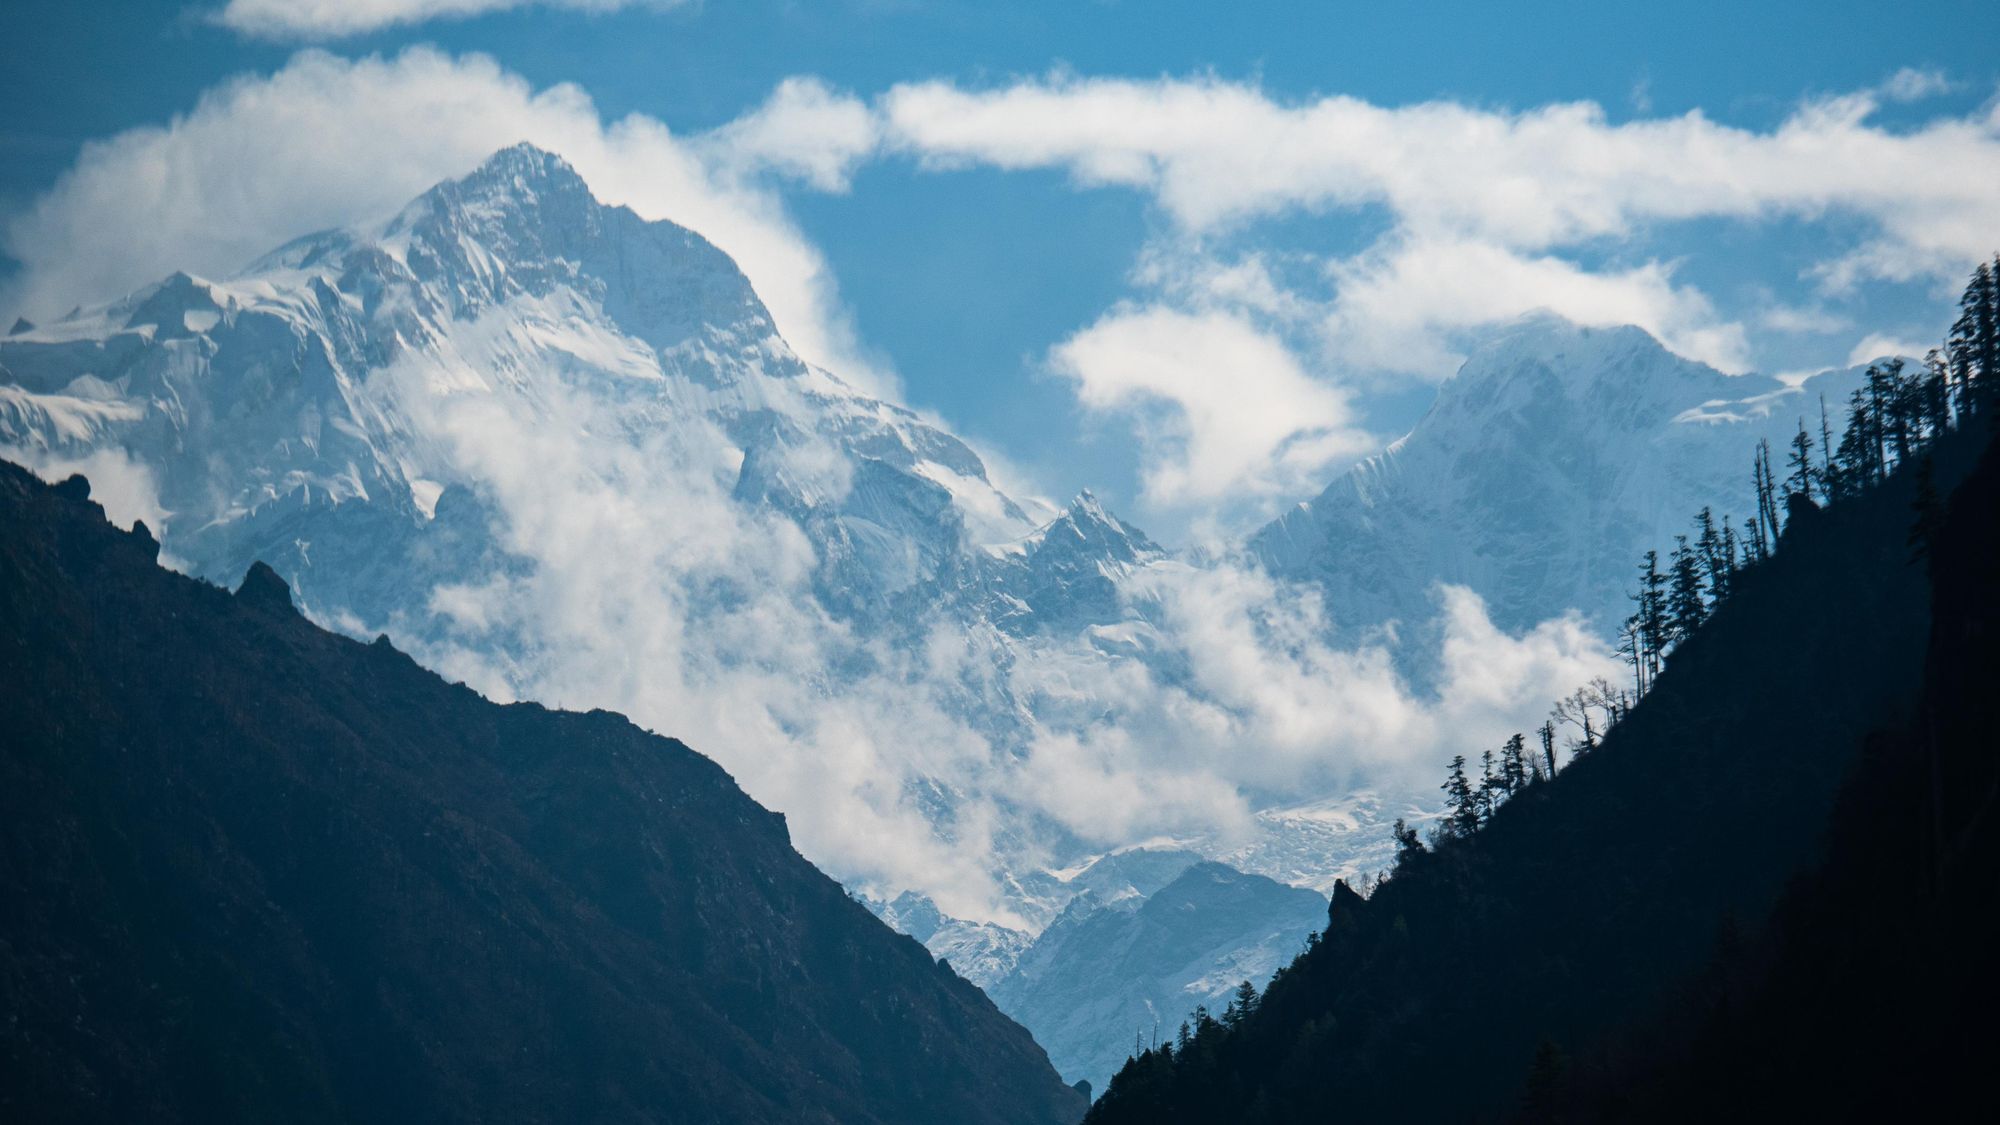 The towering Himalayan mountains which layer into the distance. Photo: Josh Edwards